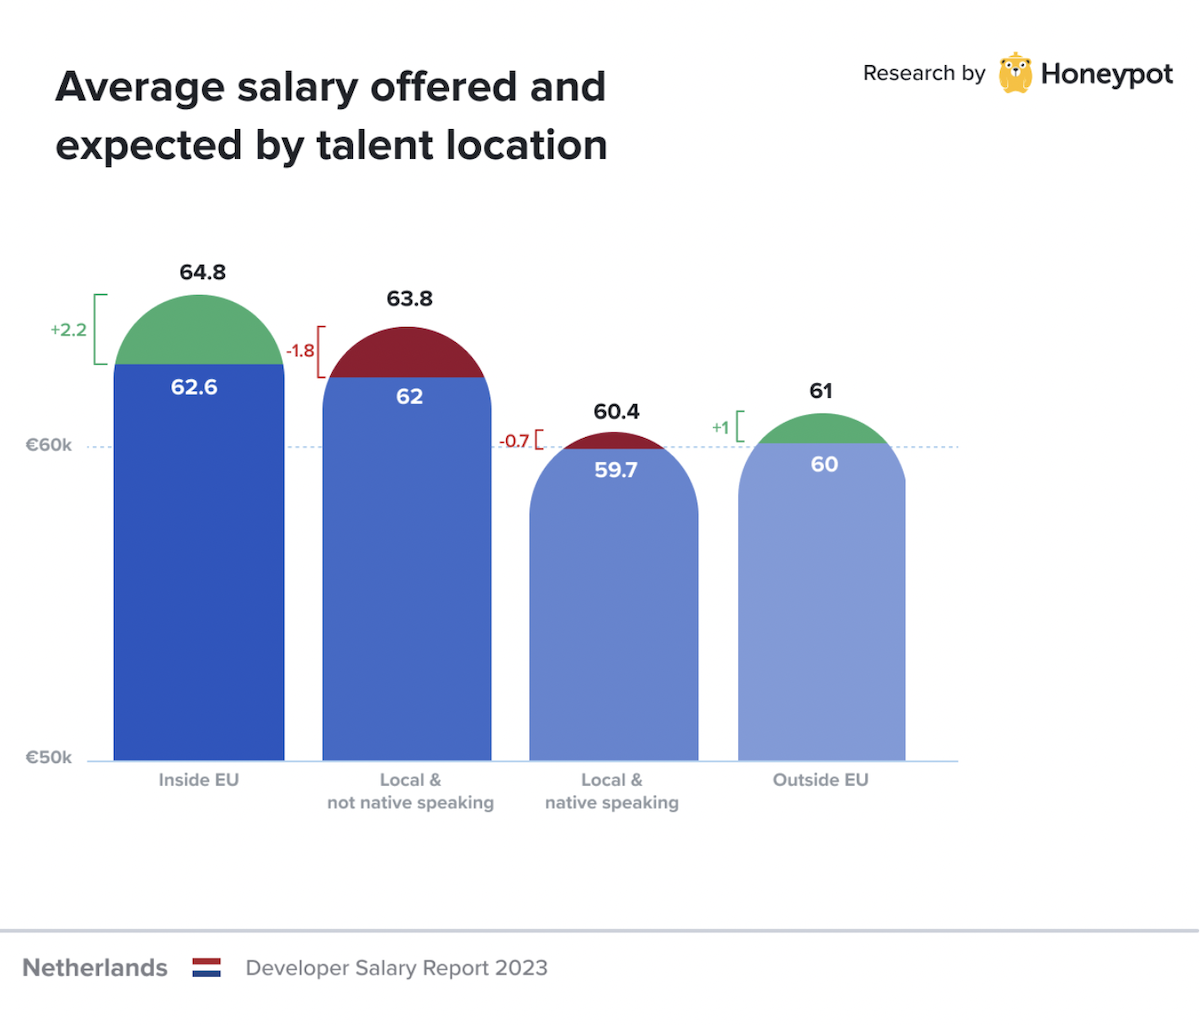 Netherlands – Average salary offered and expected by talent location